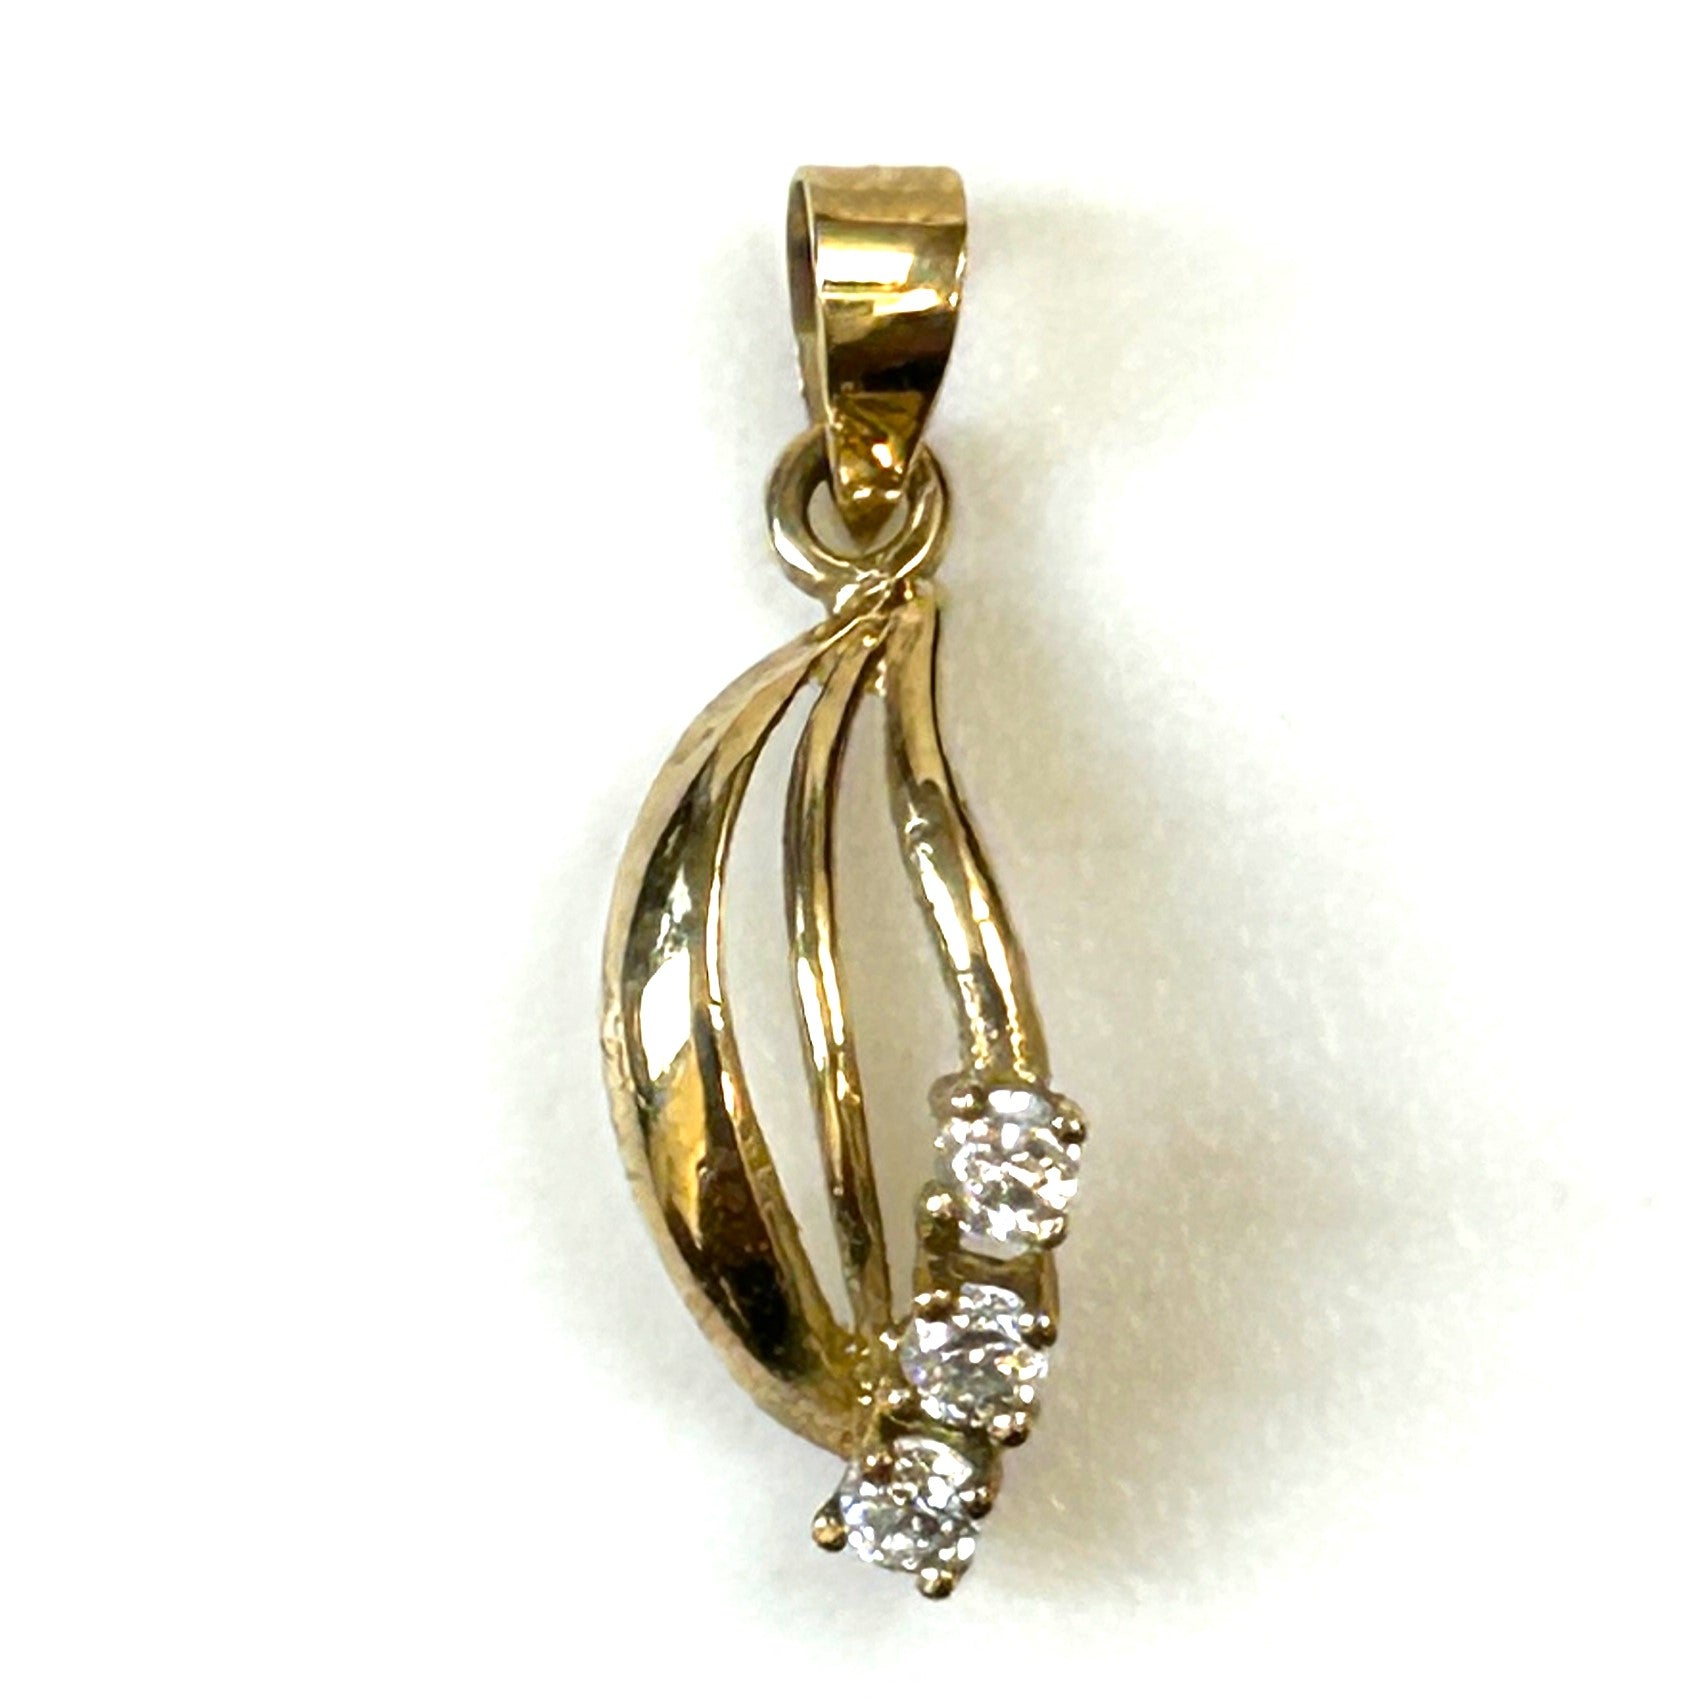 Small 9ct Gold and Crystal Pendant